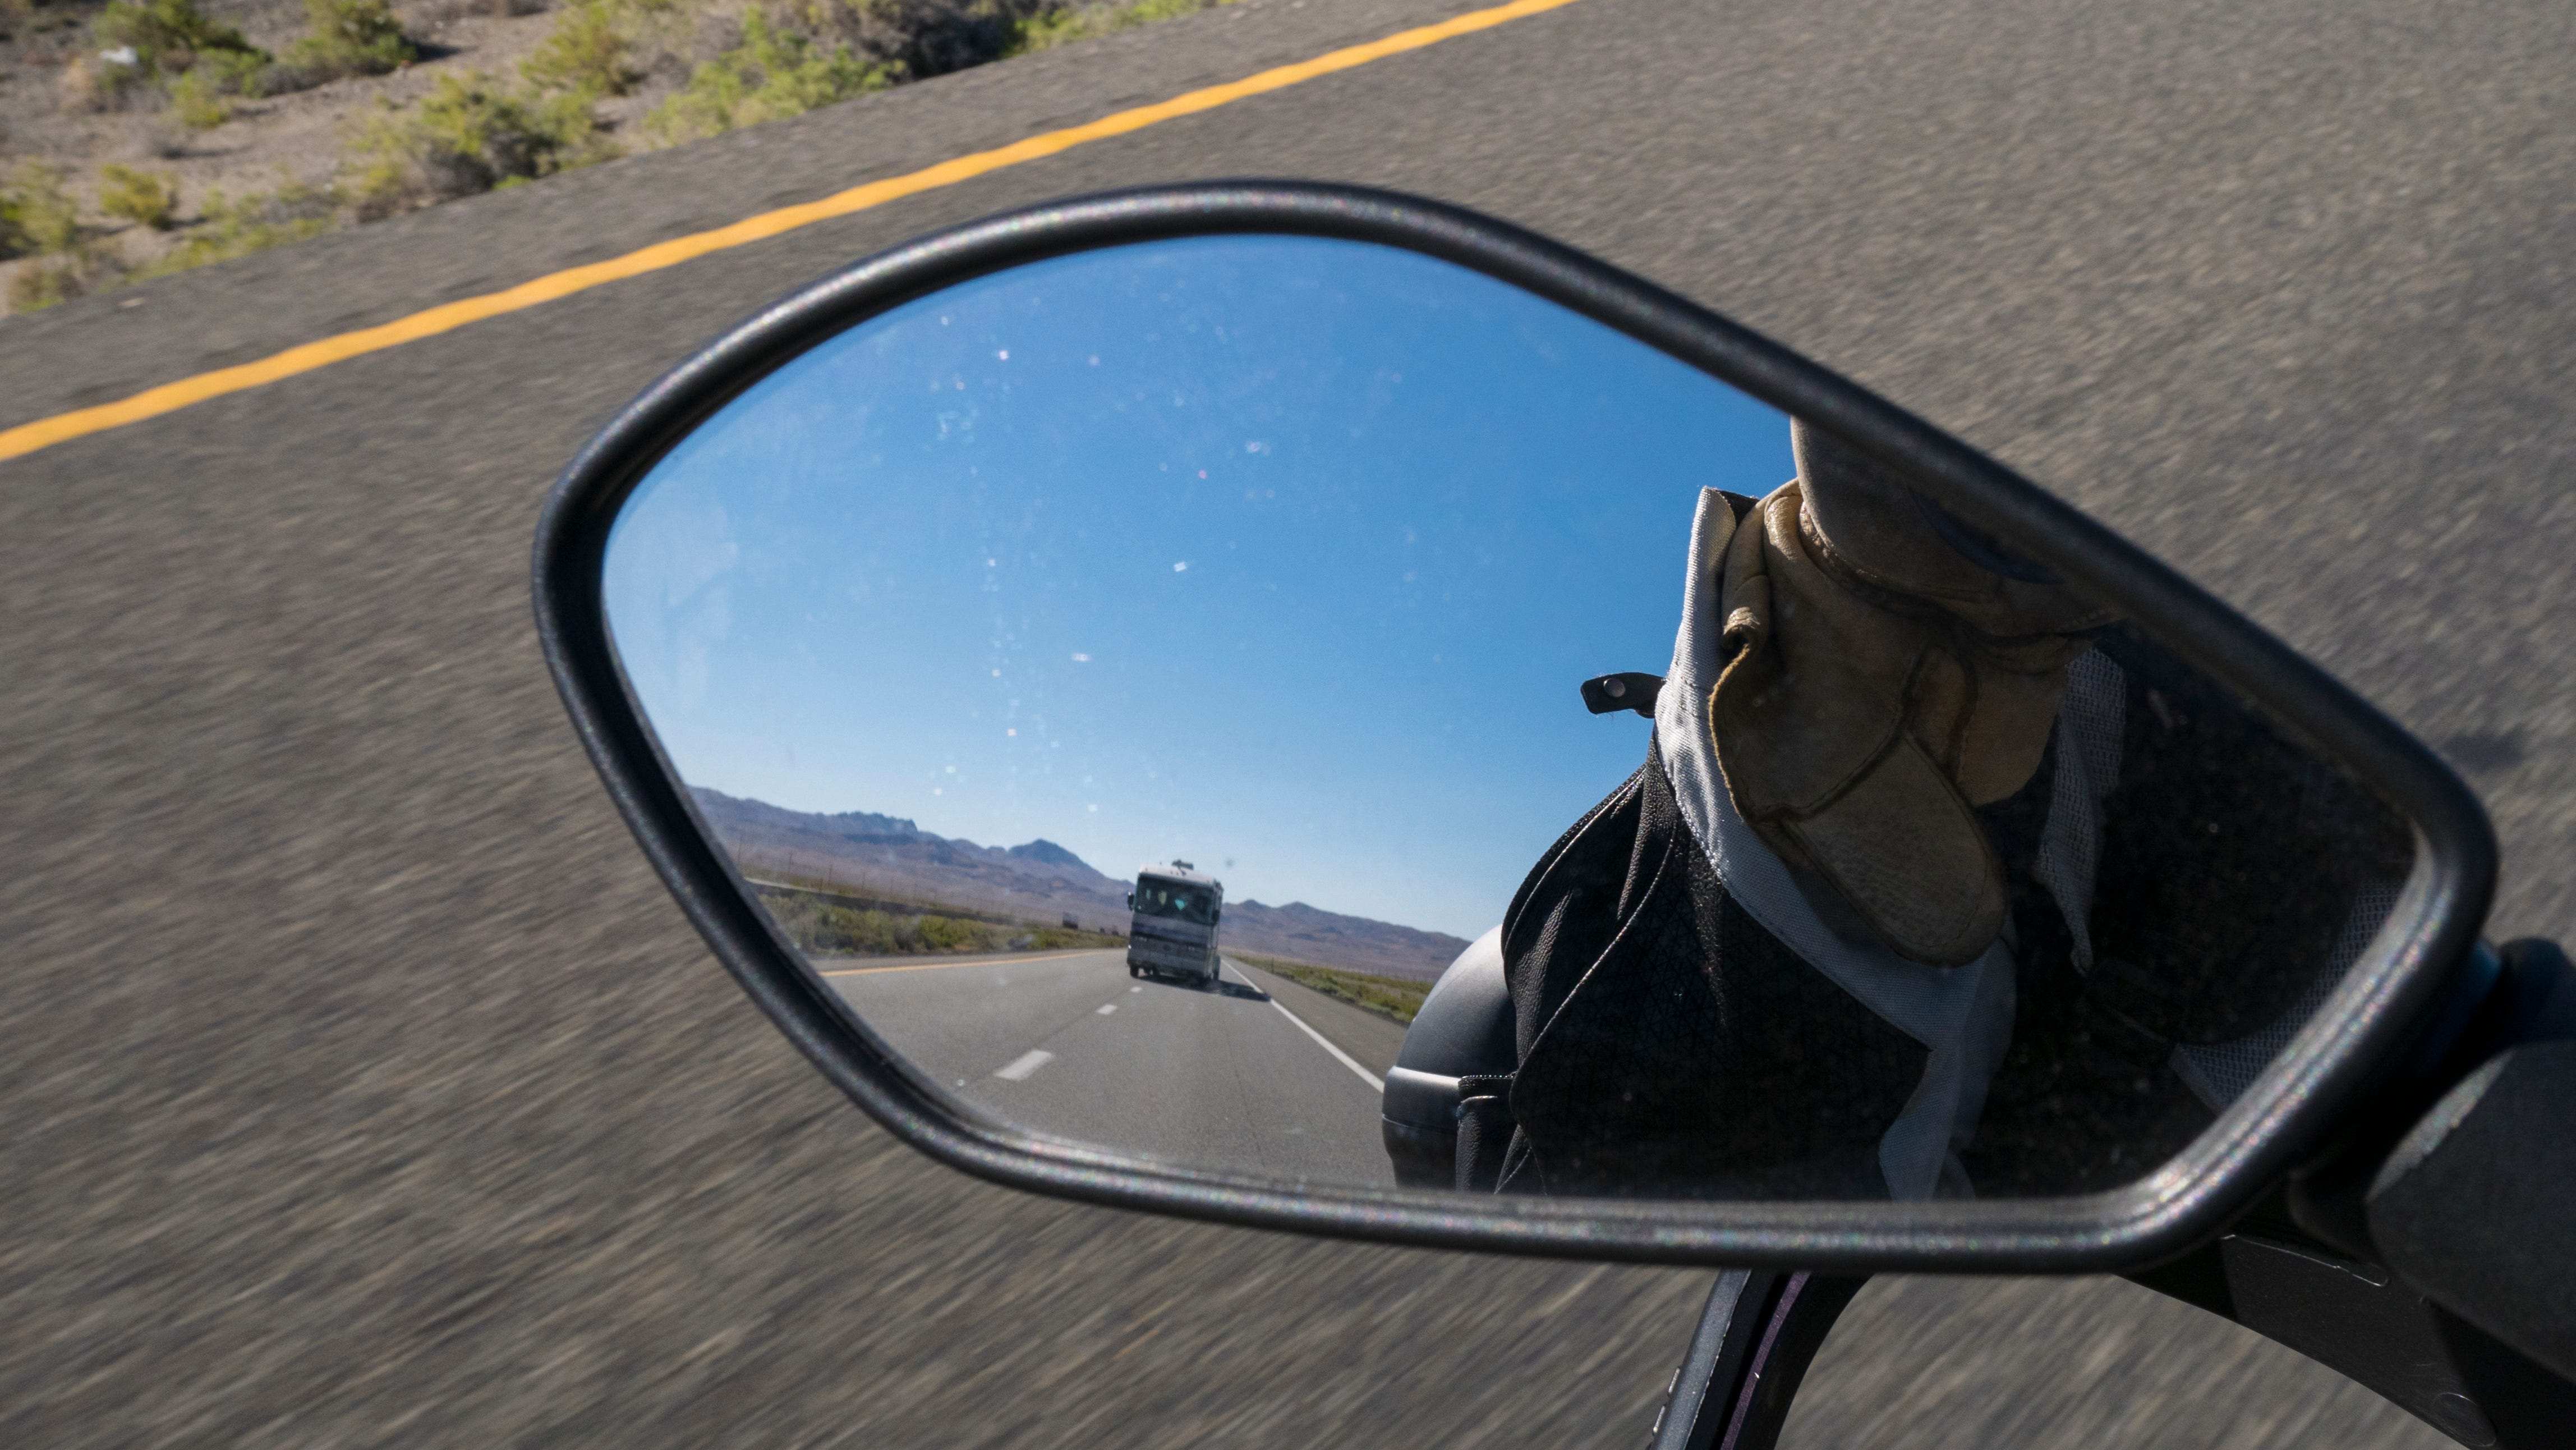 Photo from the seat of a moving motorcycle on the interestate. The photo is of the motorcycle's left rearview mirror. In the mirror is a large RV behind the motorcycle switching lanes to pass the motorcycle. Beyond the RV are rugged brown mountains. The mirror also shows the rider's gloved hand and a portion of his jacket. Below the mirror, the asphalt of the interstate is blurred by the motorcycle's speed.